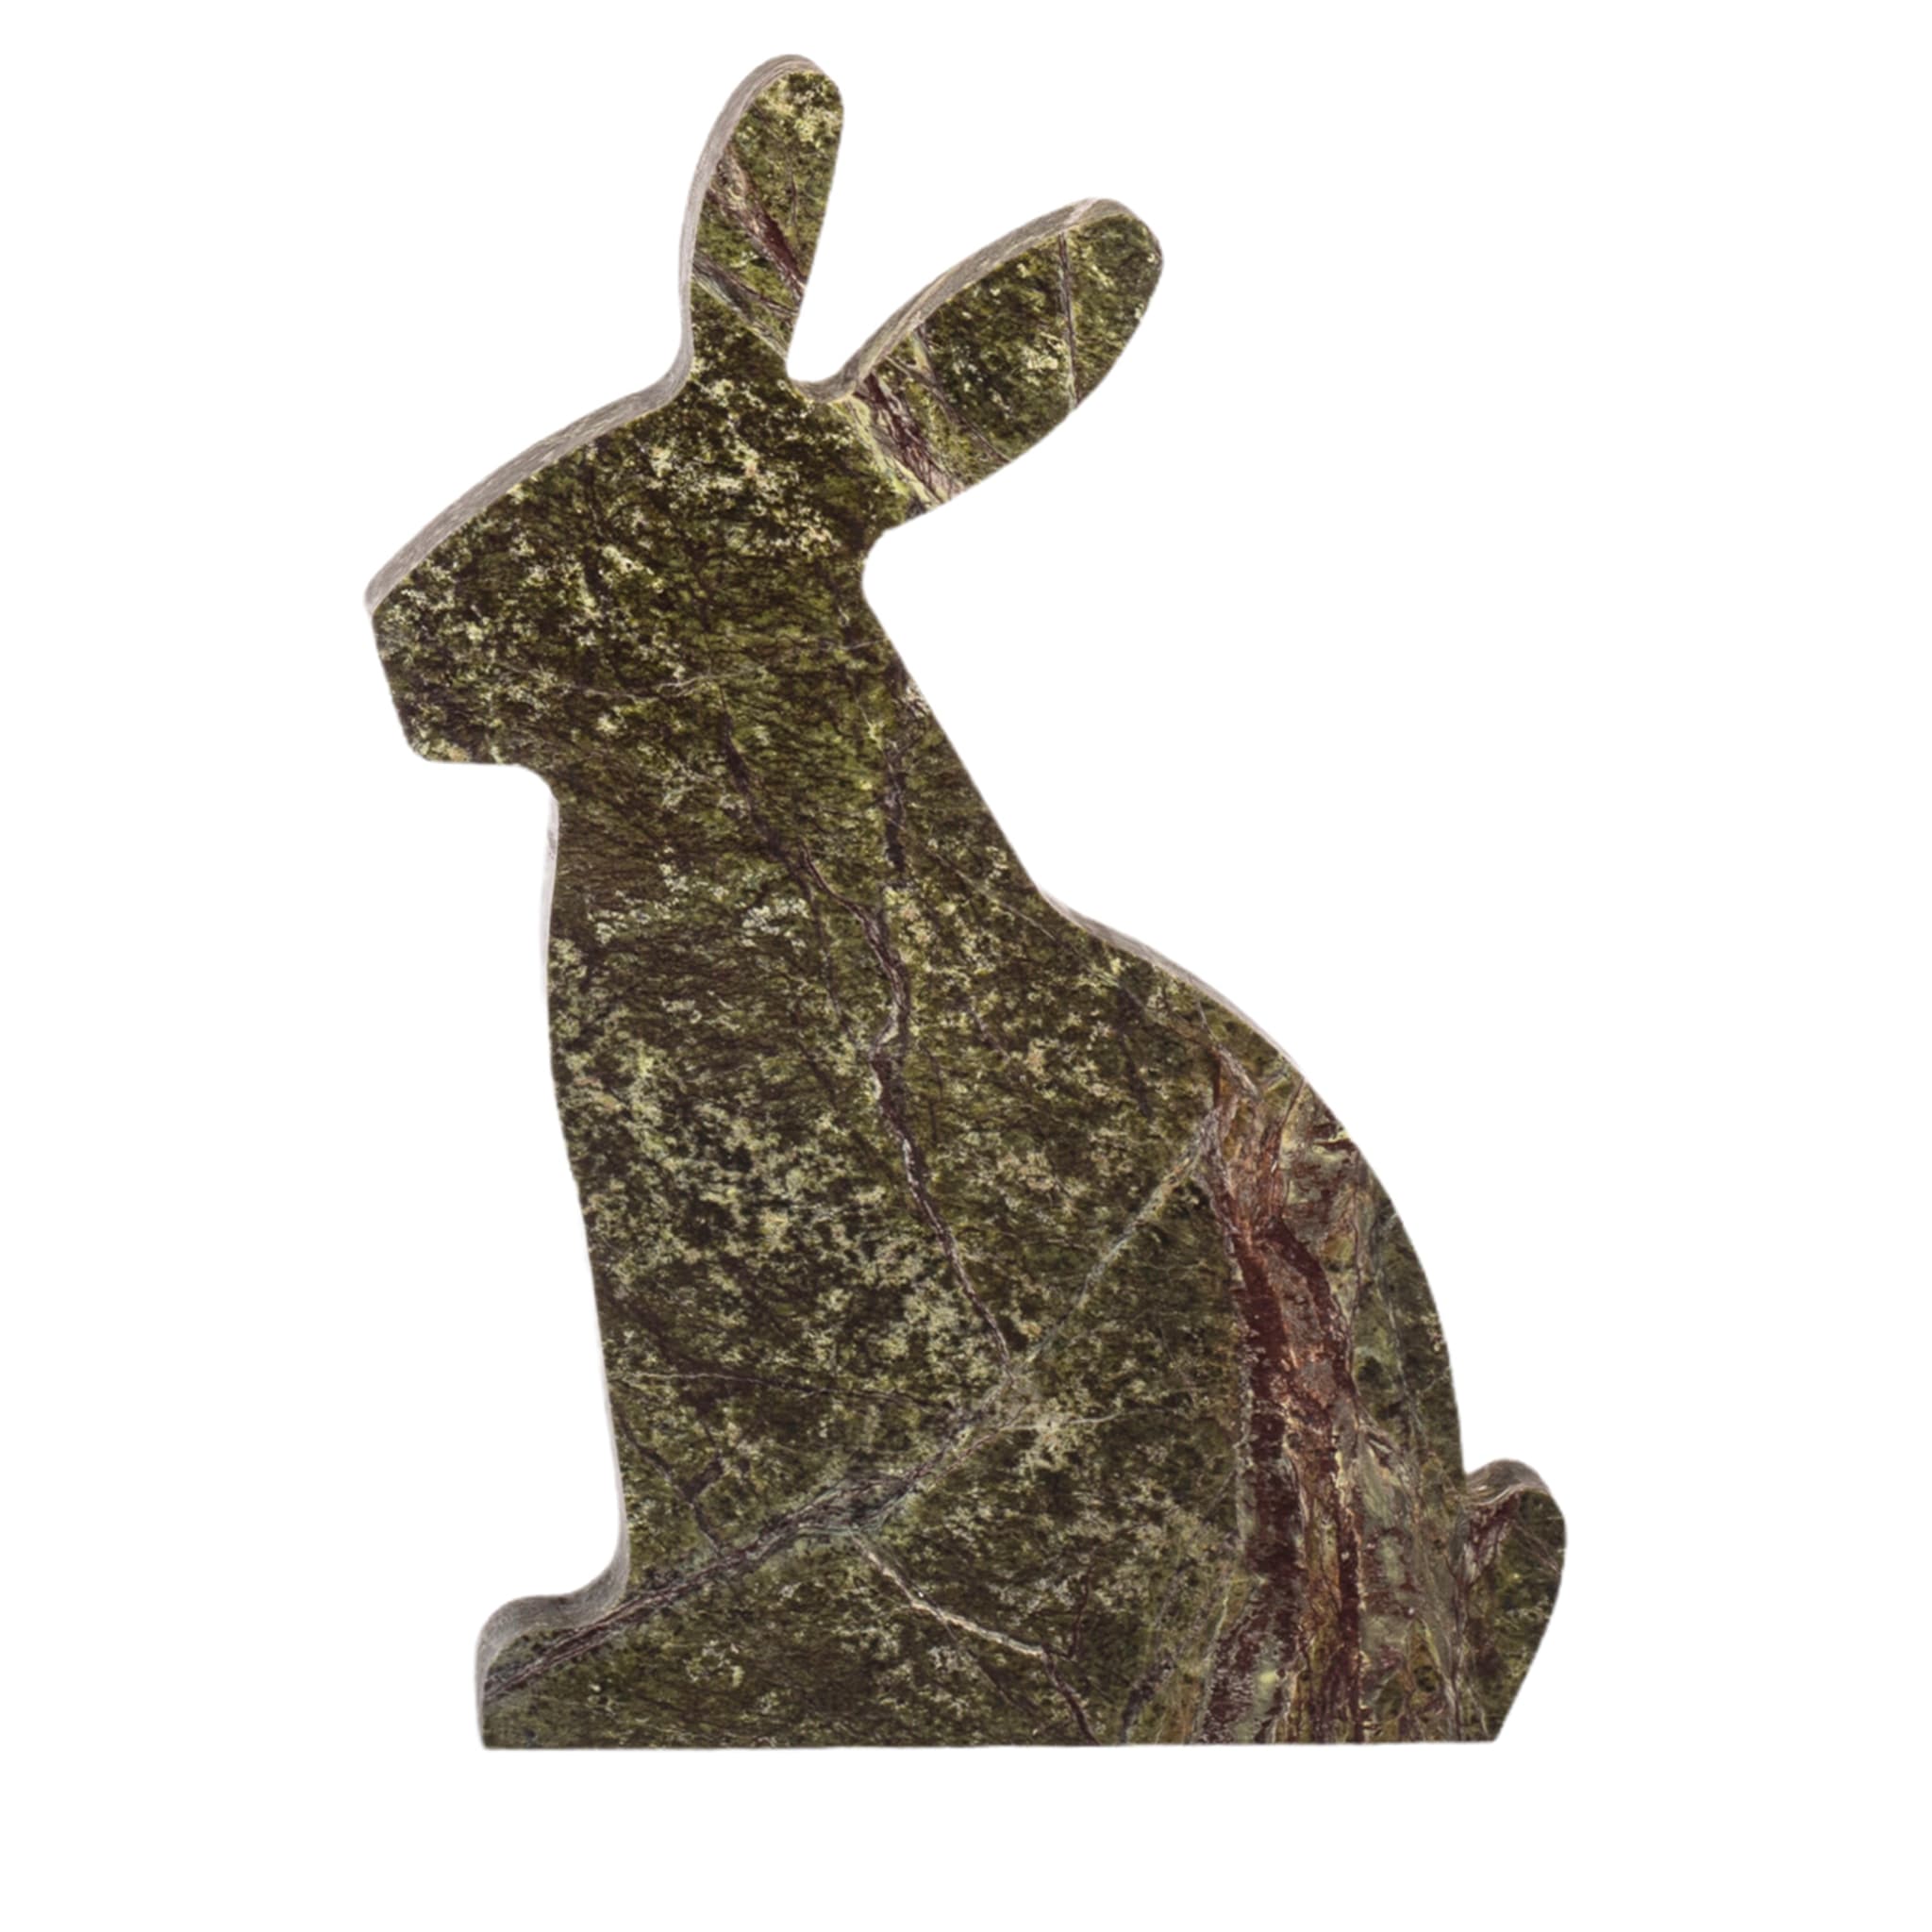 Bunny Picasso Green Left Bookend by Alessandra Grasso - Alternative view 1